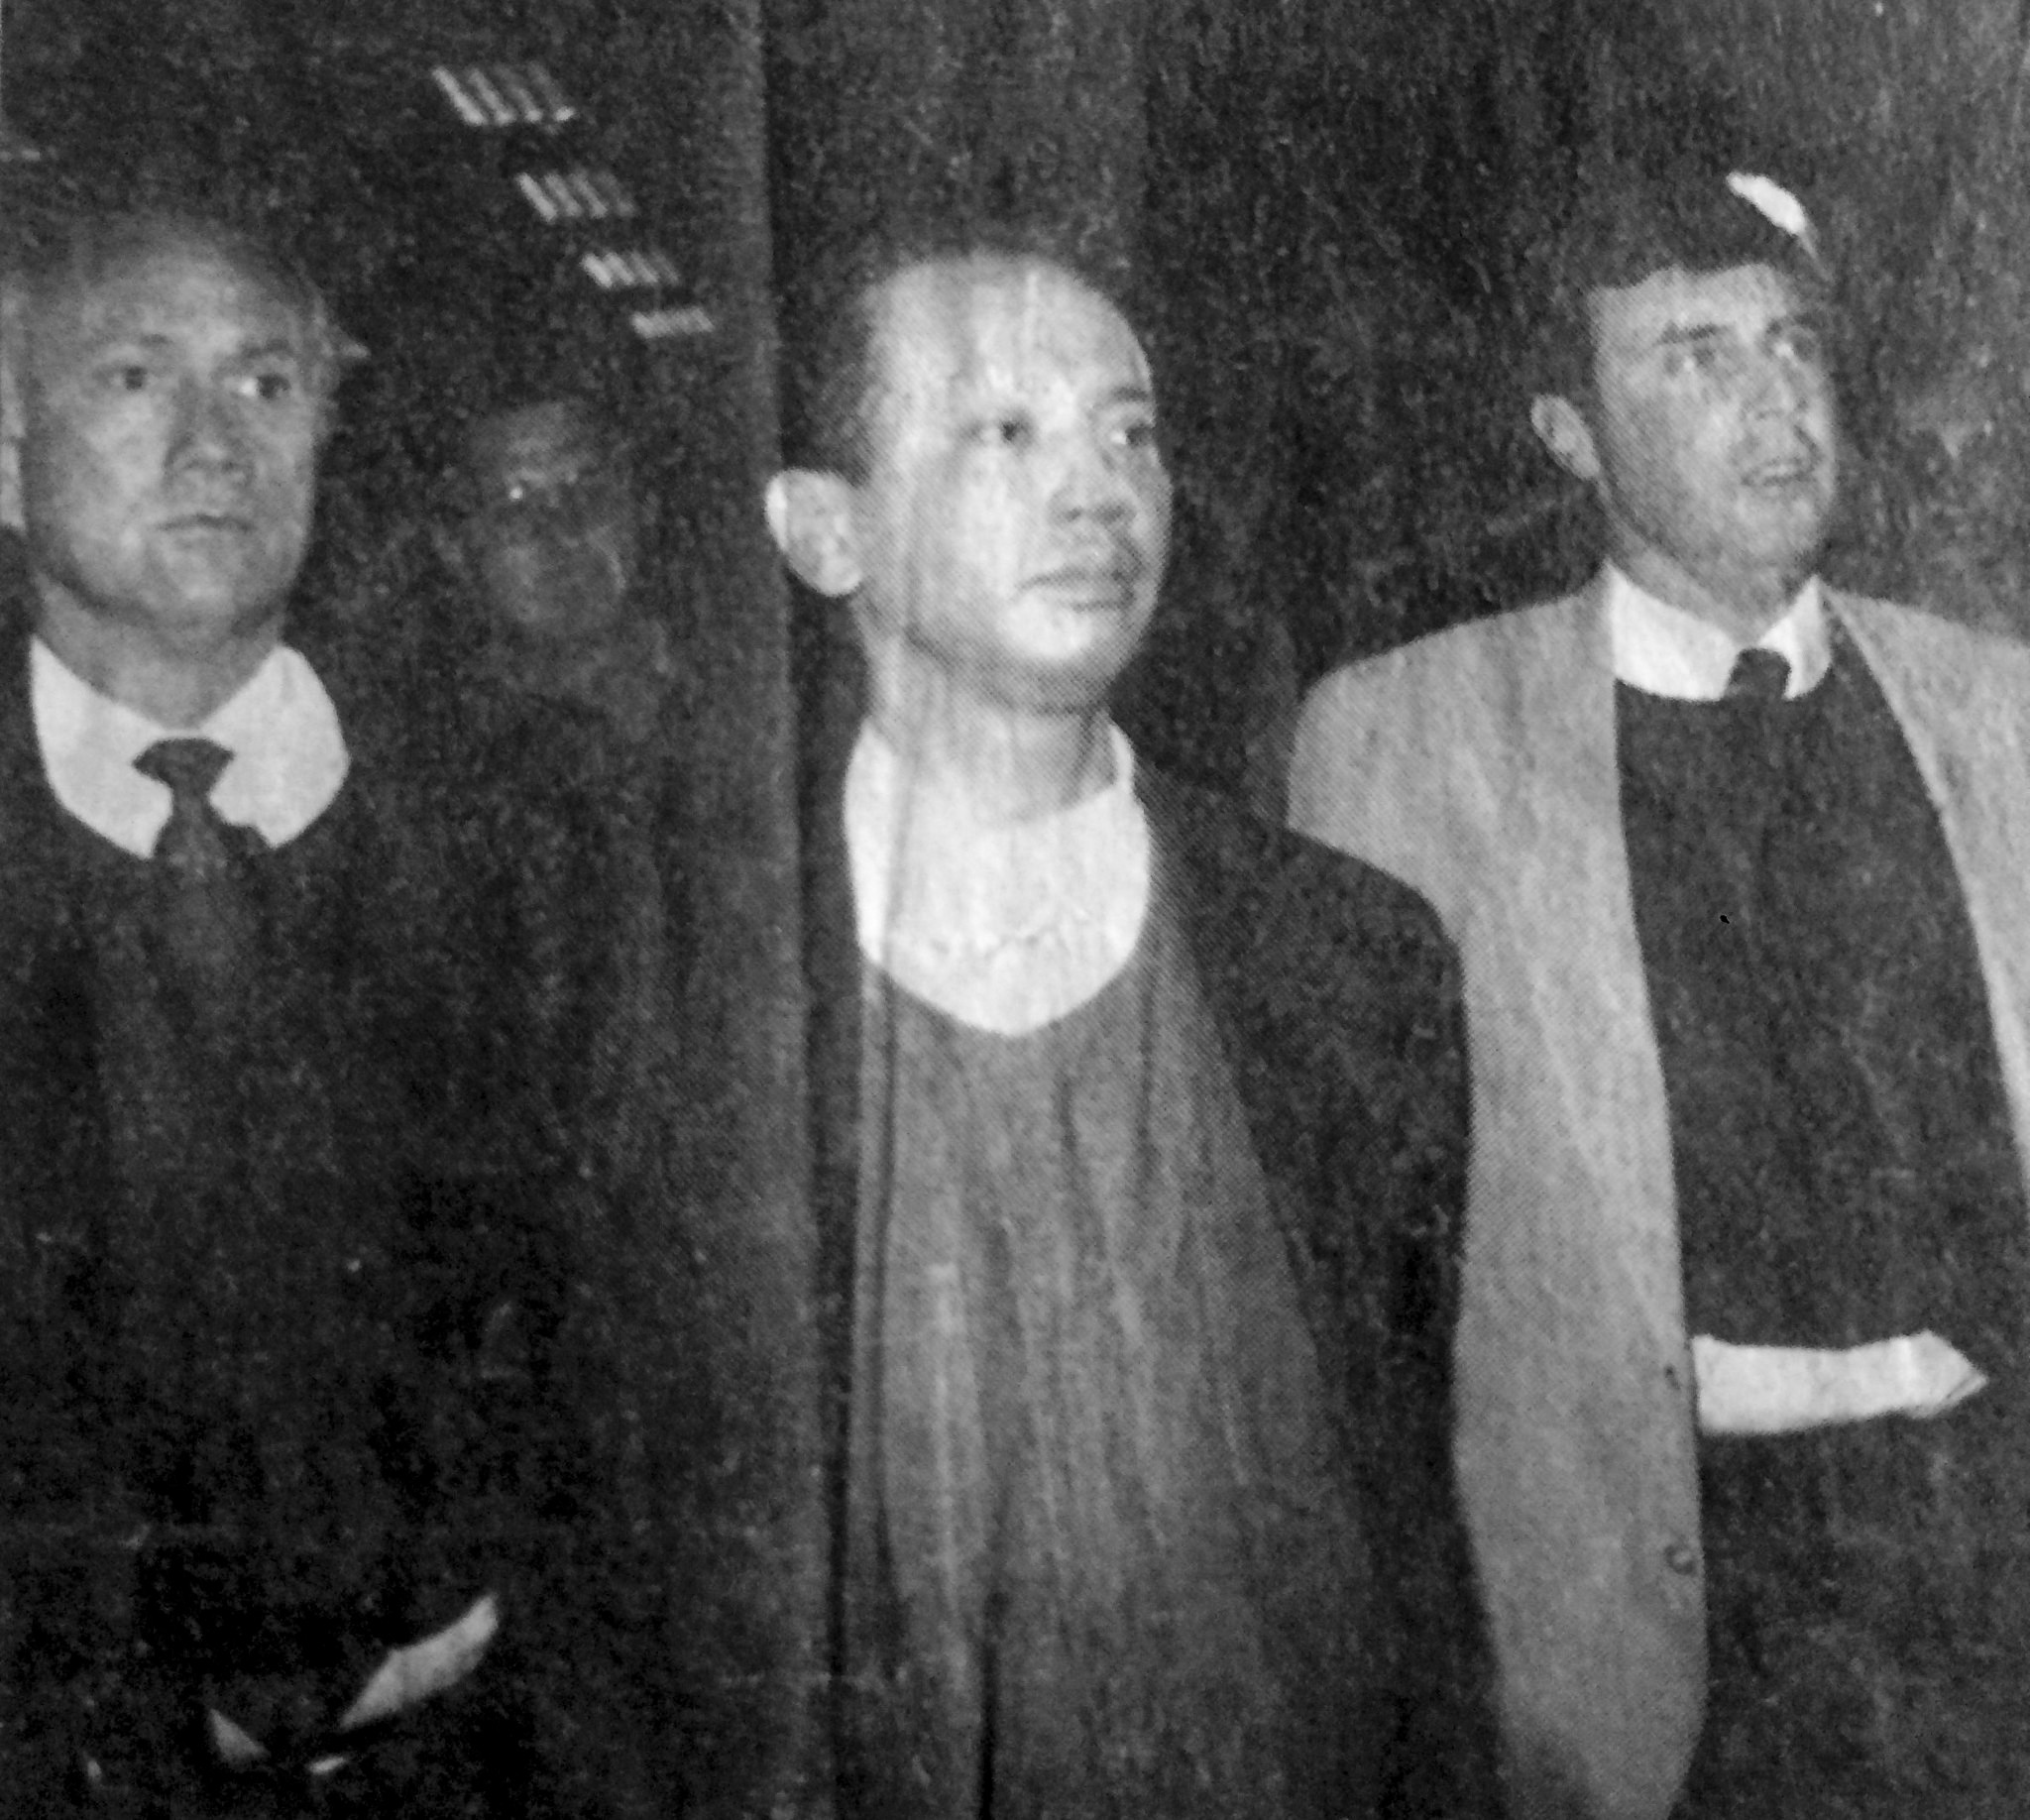 Tony Young, flanked by FBI agents, arrives at LAX airport in 1995, having been arrested by Taiwanese authorities and put on a Los Angeles-bound flight. Picture: Los Angeles Times